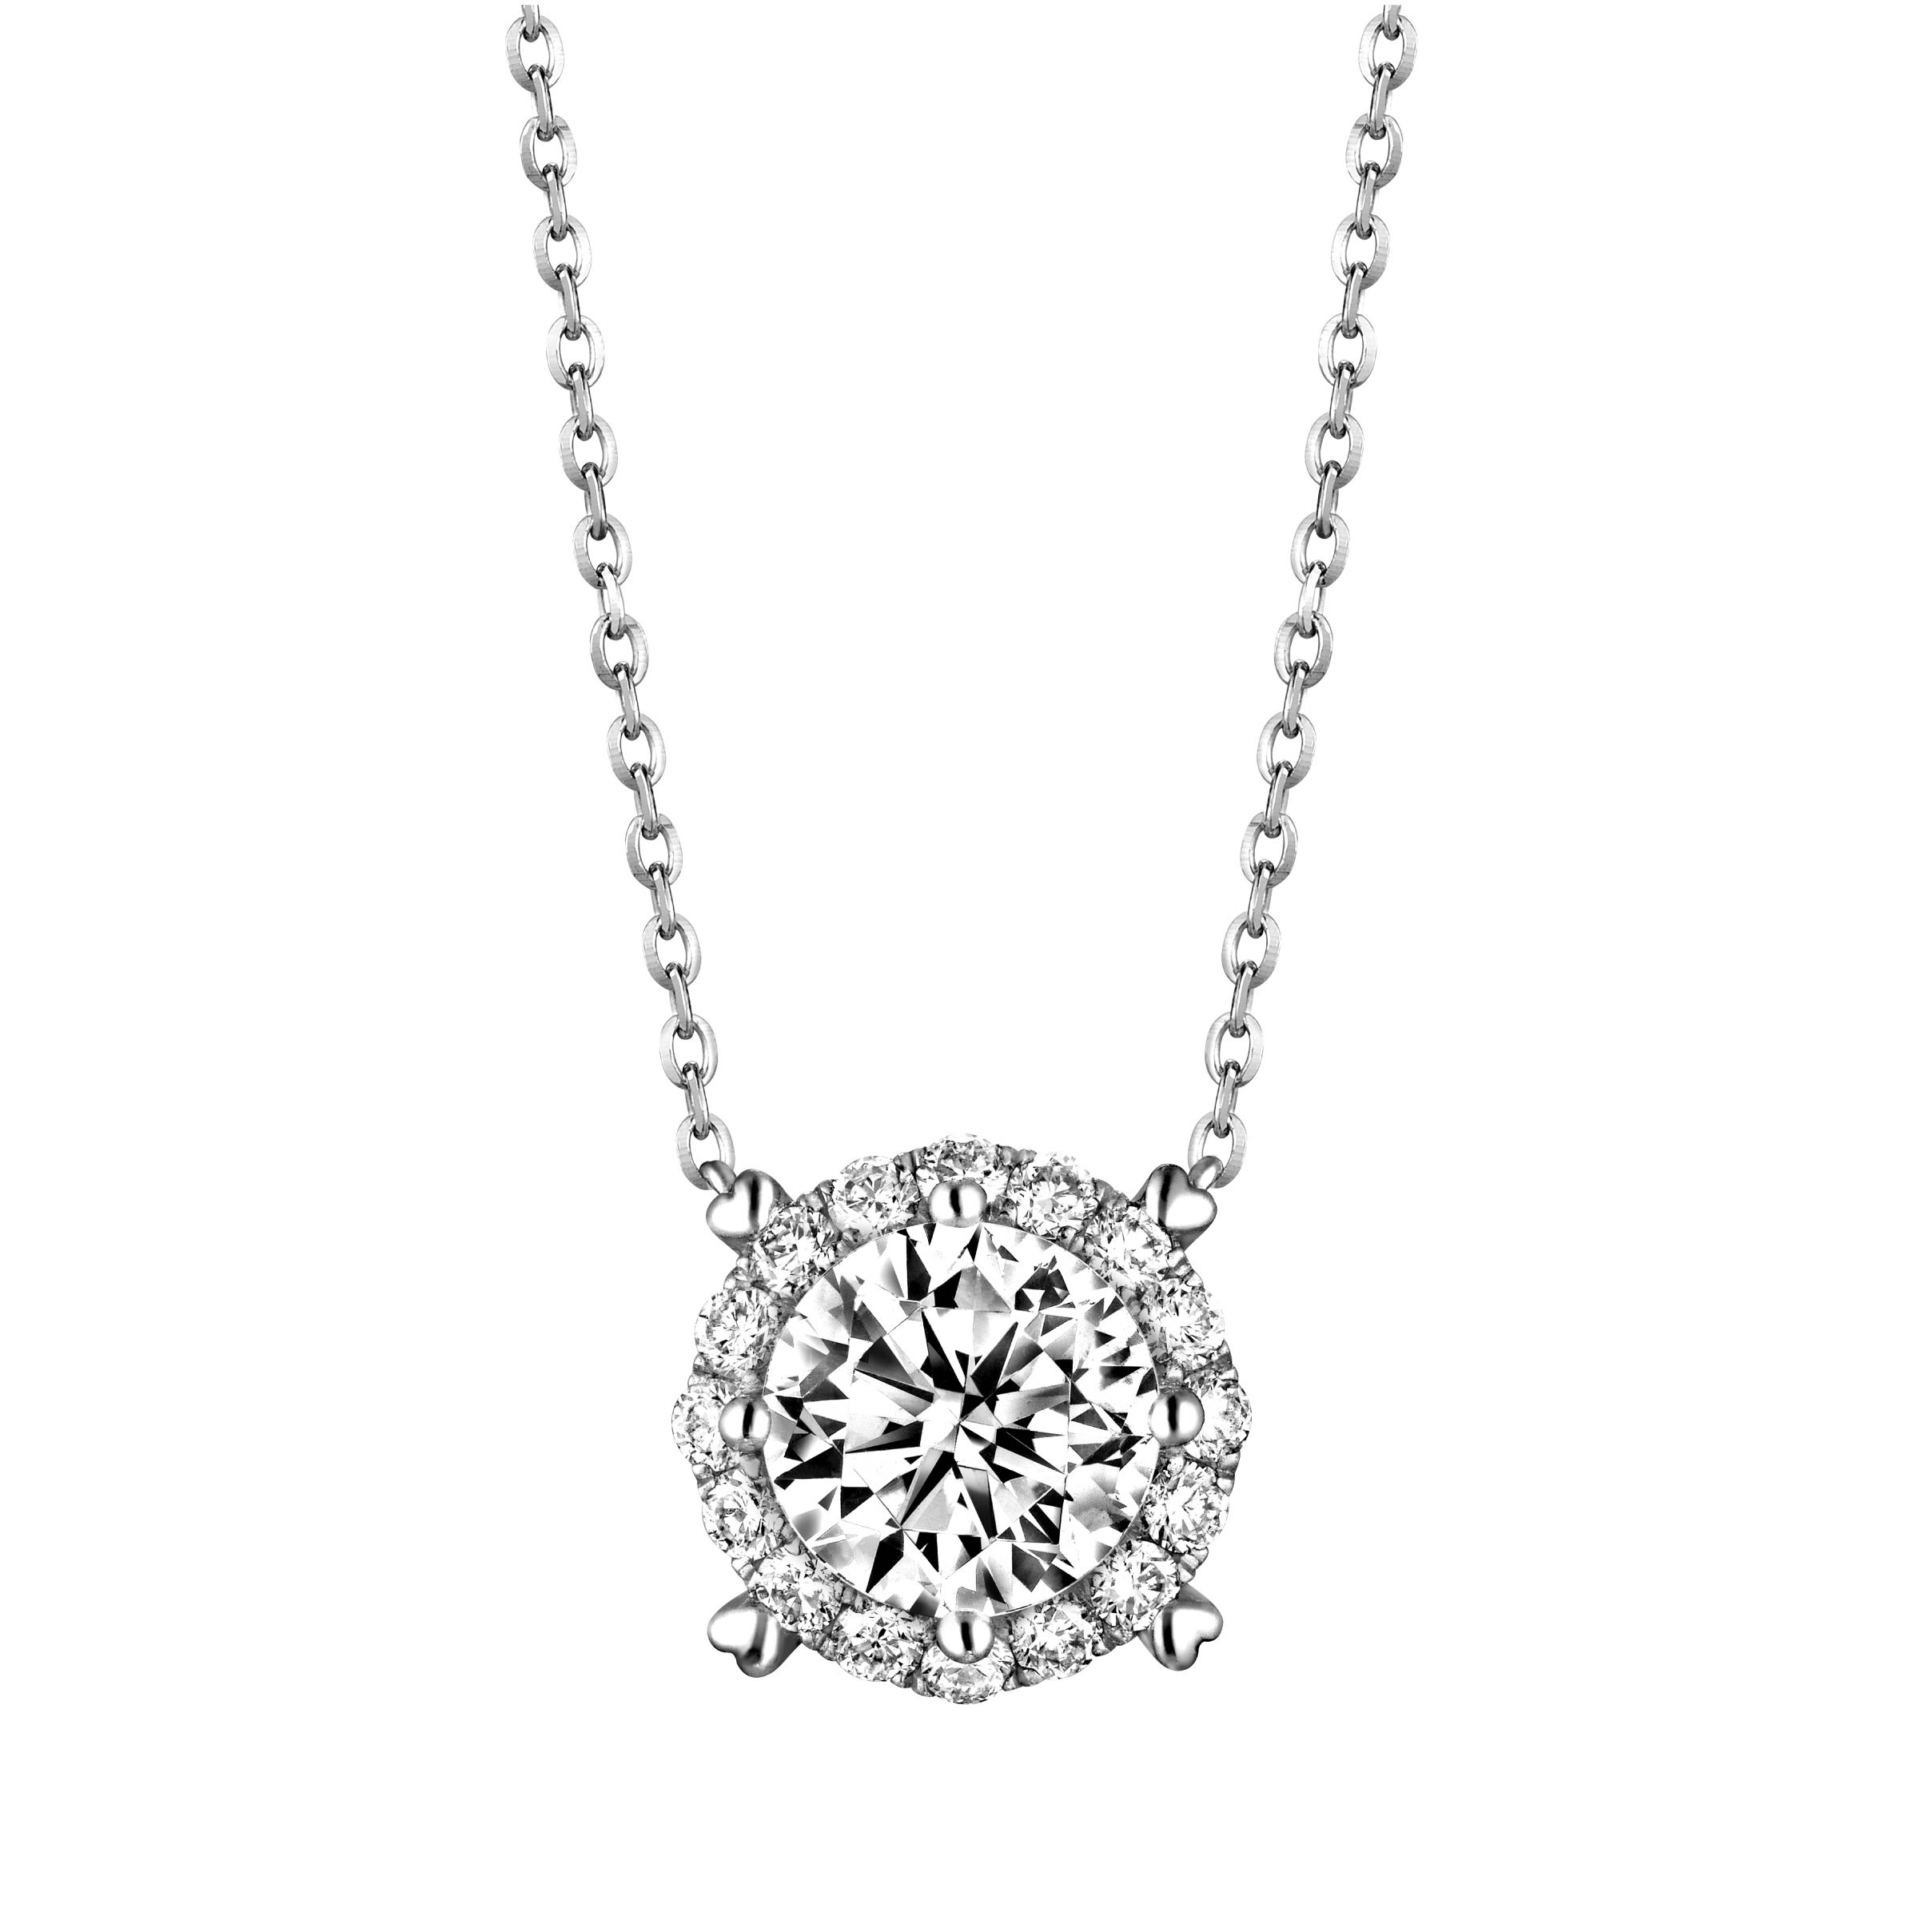 Love is Beauty Collection 18K White Gold Diamond Necklace